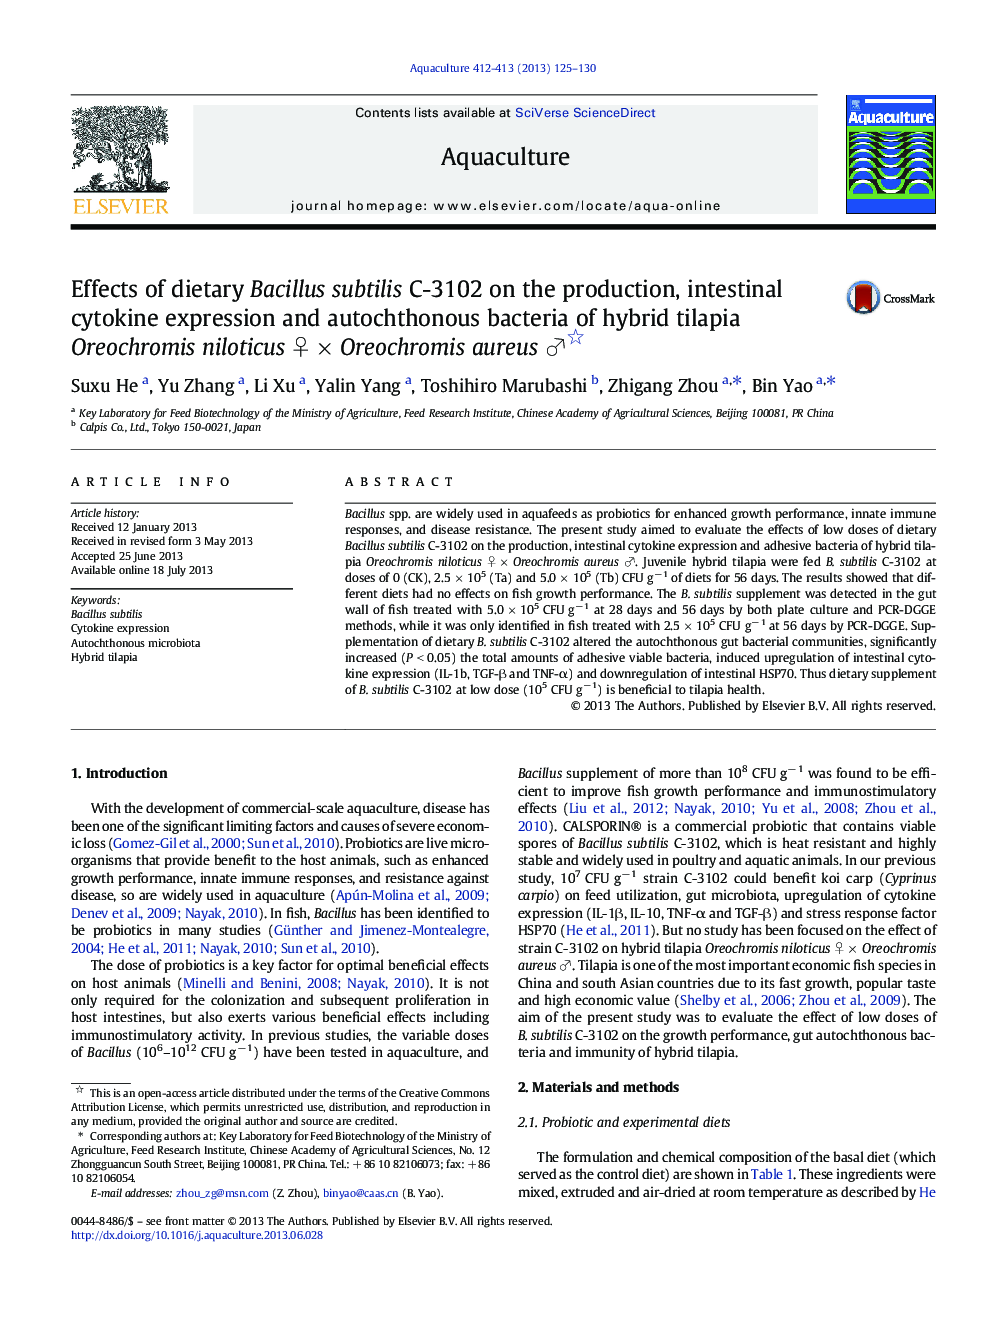 Effects of dietary Bacillus subtilis C-3102 on the production, intestinal cytokine expression and autochthonous bacteria of hybrid tilapia Oreochromis niloticus âÂ ÃÂ Oreochromis aureus â